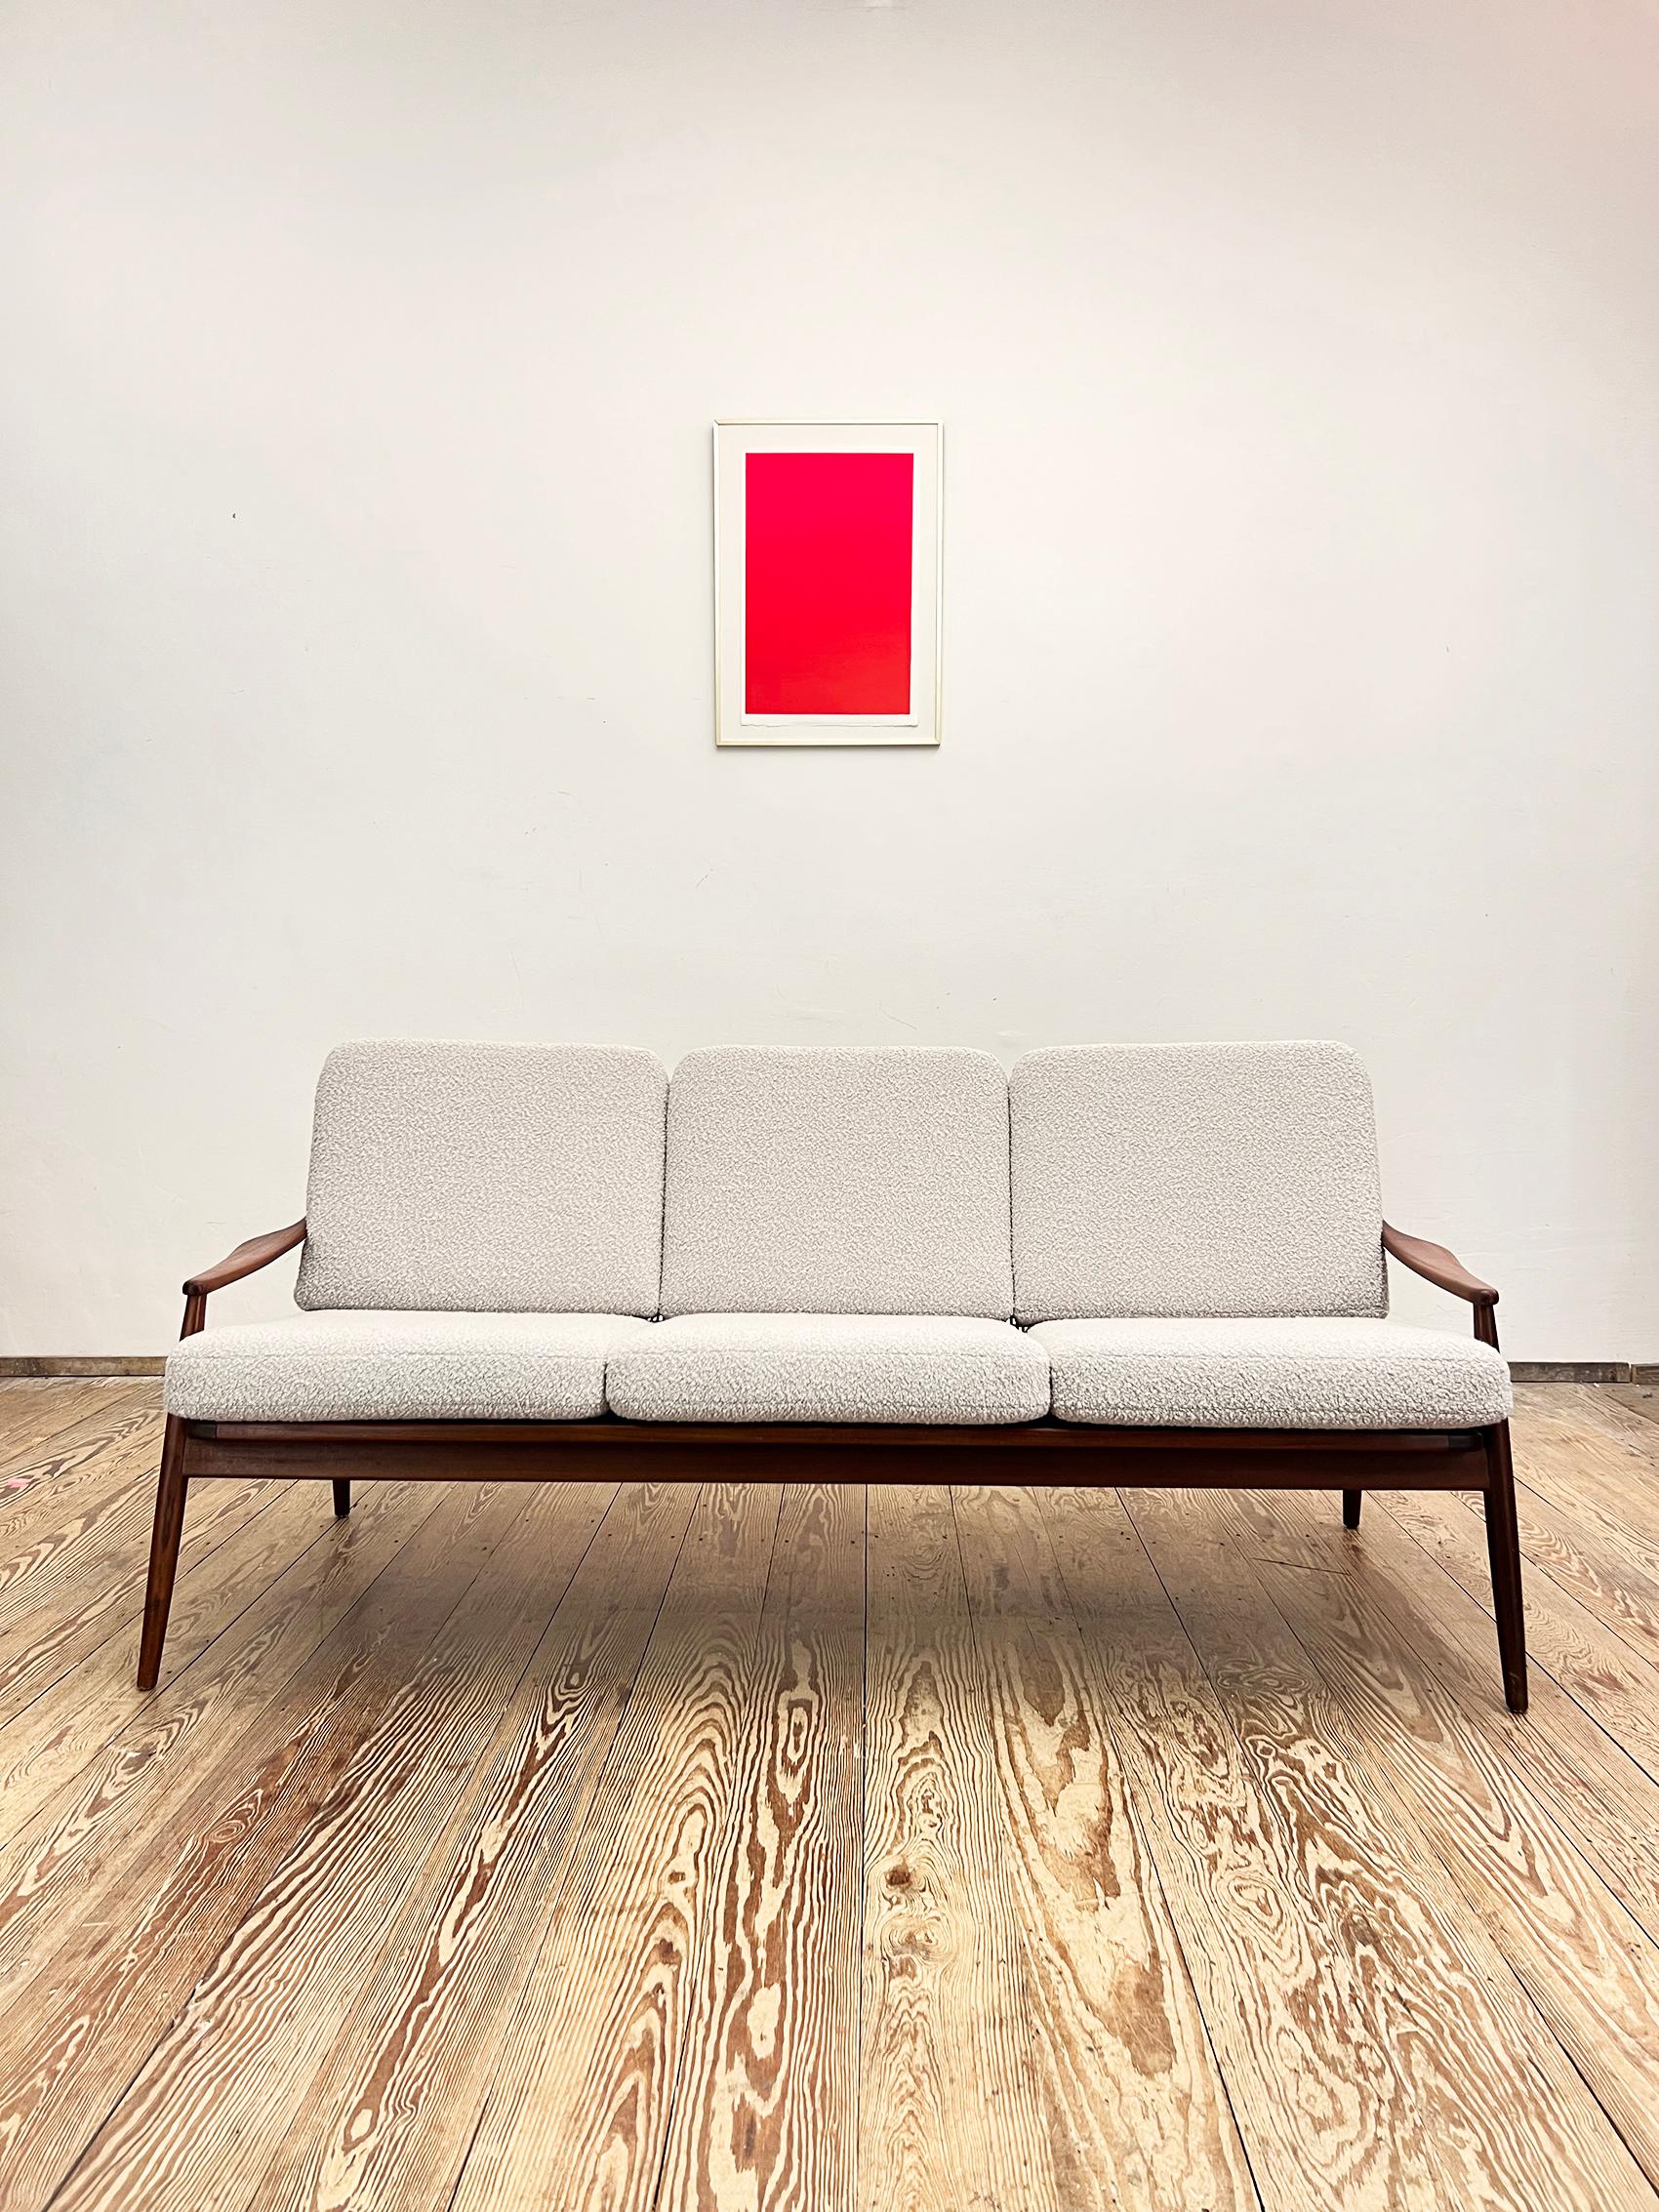 Dimensions: 180 x 74 x 74 x43 cm (Width x Depth x Height x Seat Height)

This beautiful and extremely rare sofa was designed by Hartmut Lohmeyer as part of his 400 series for Wilkhahn in the 1950s in Germany. The elegant shape and the fragile